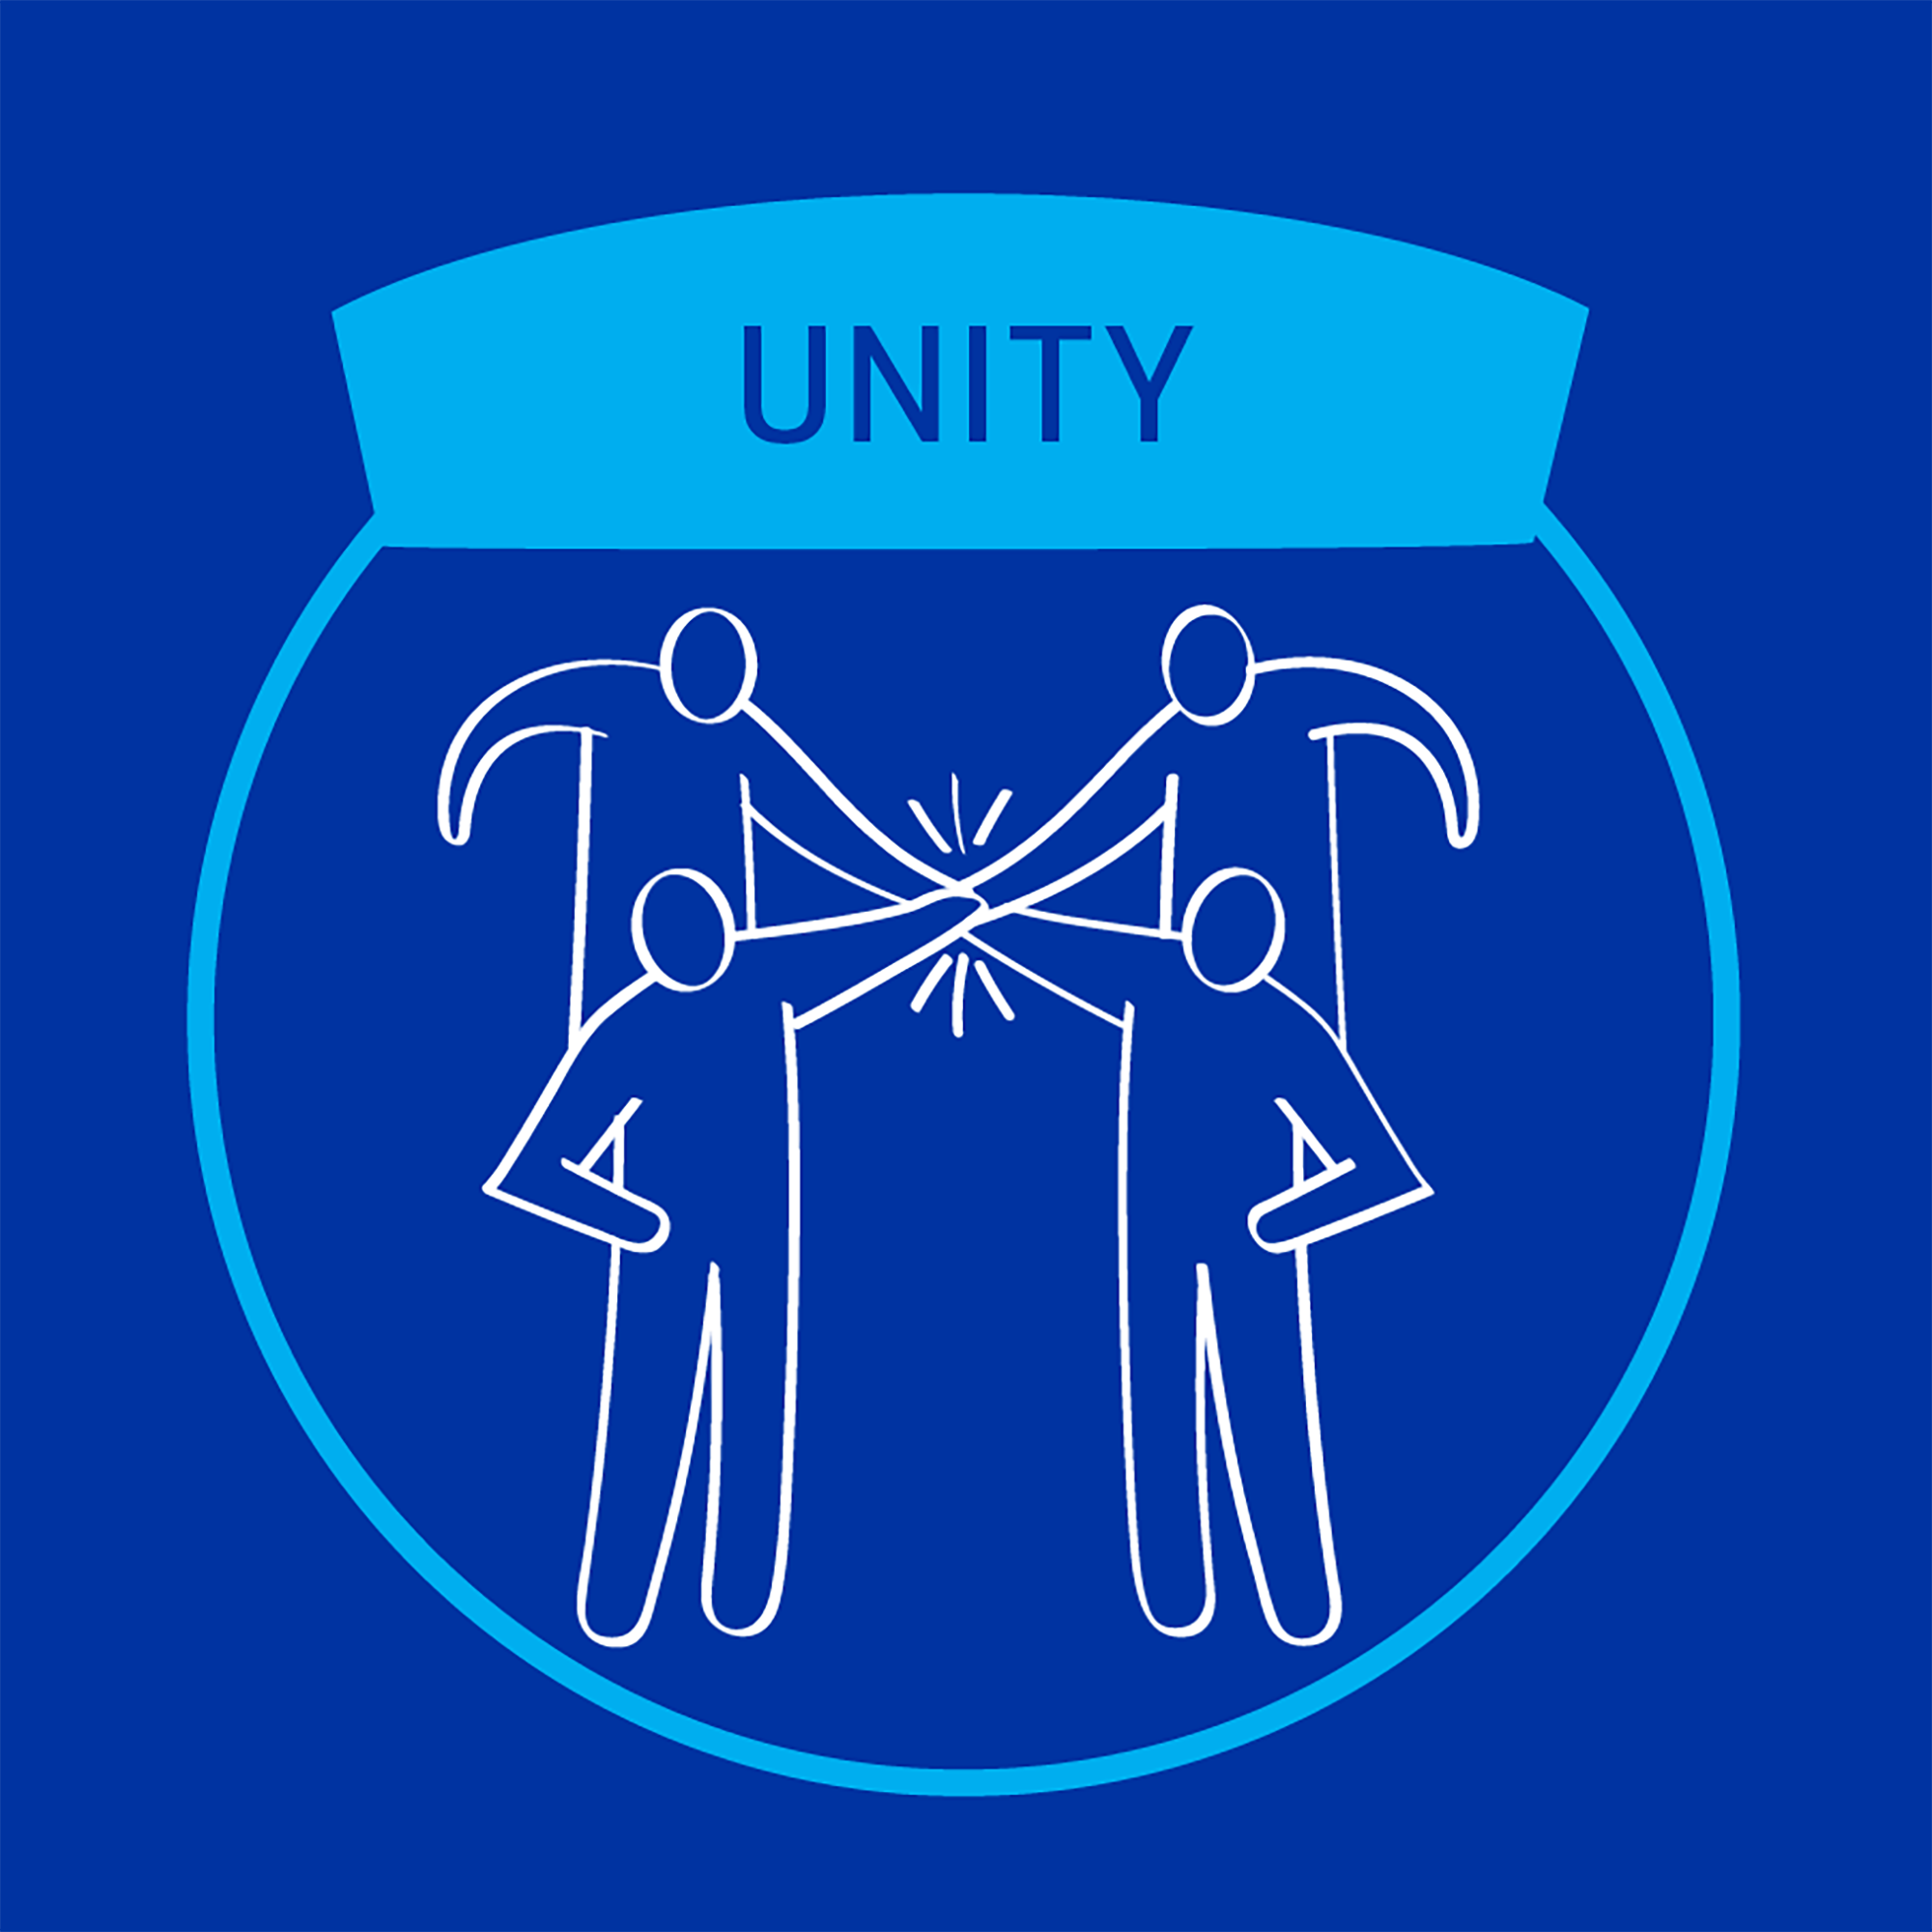 MiTek's guiding principle of unity - A square graphic of four people with their hands connected in the middle